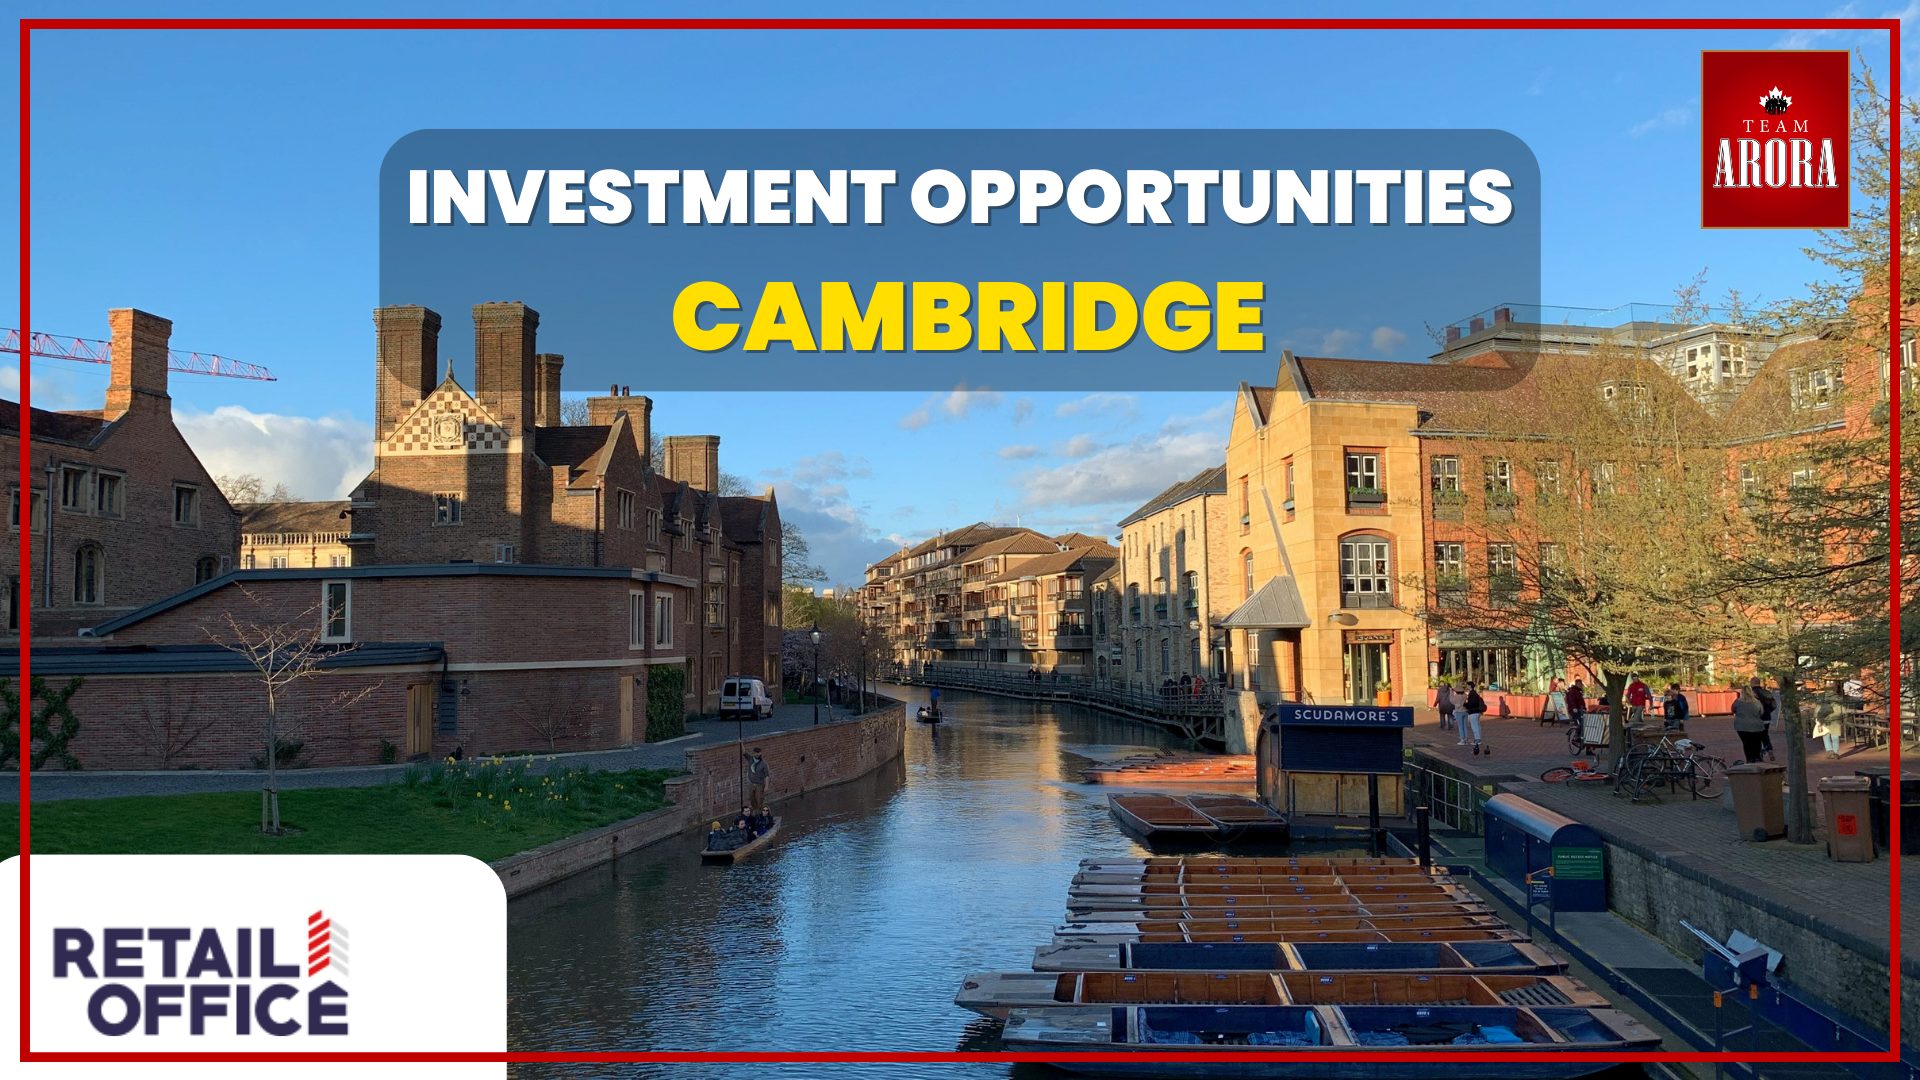 Cambridge Property Market: A Beacon of Investment Opportunities Ahead